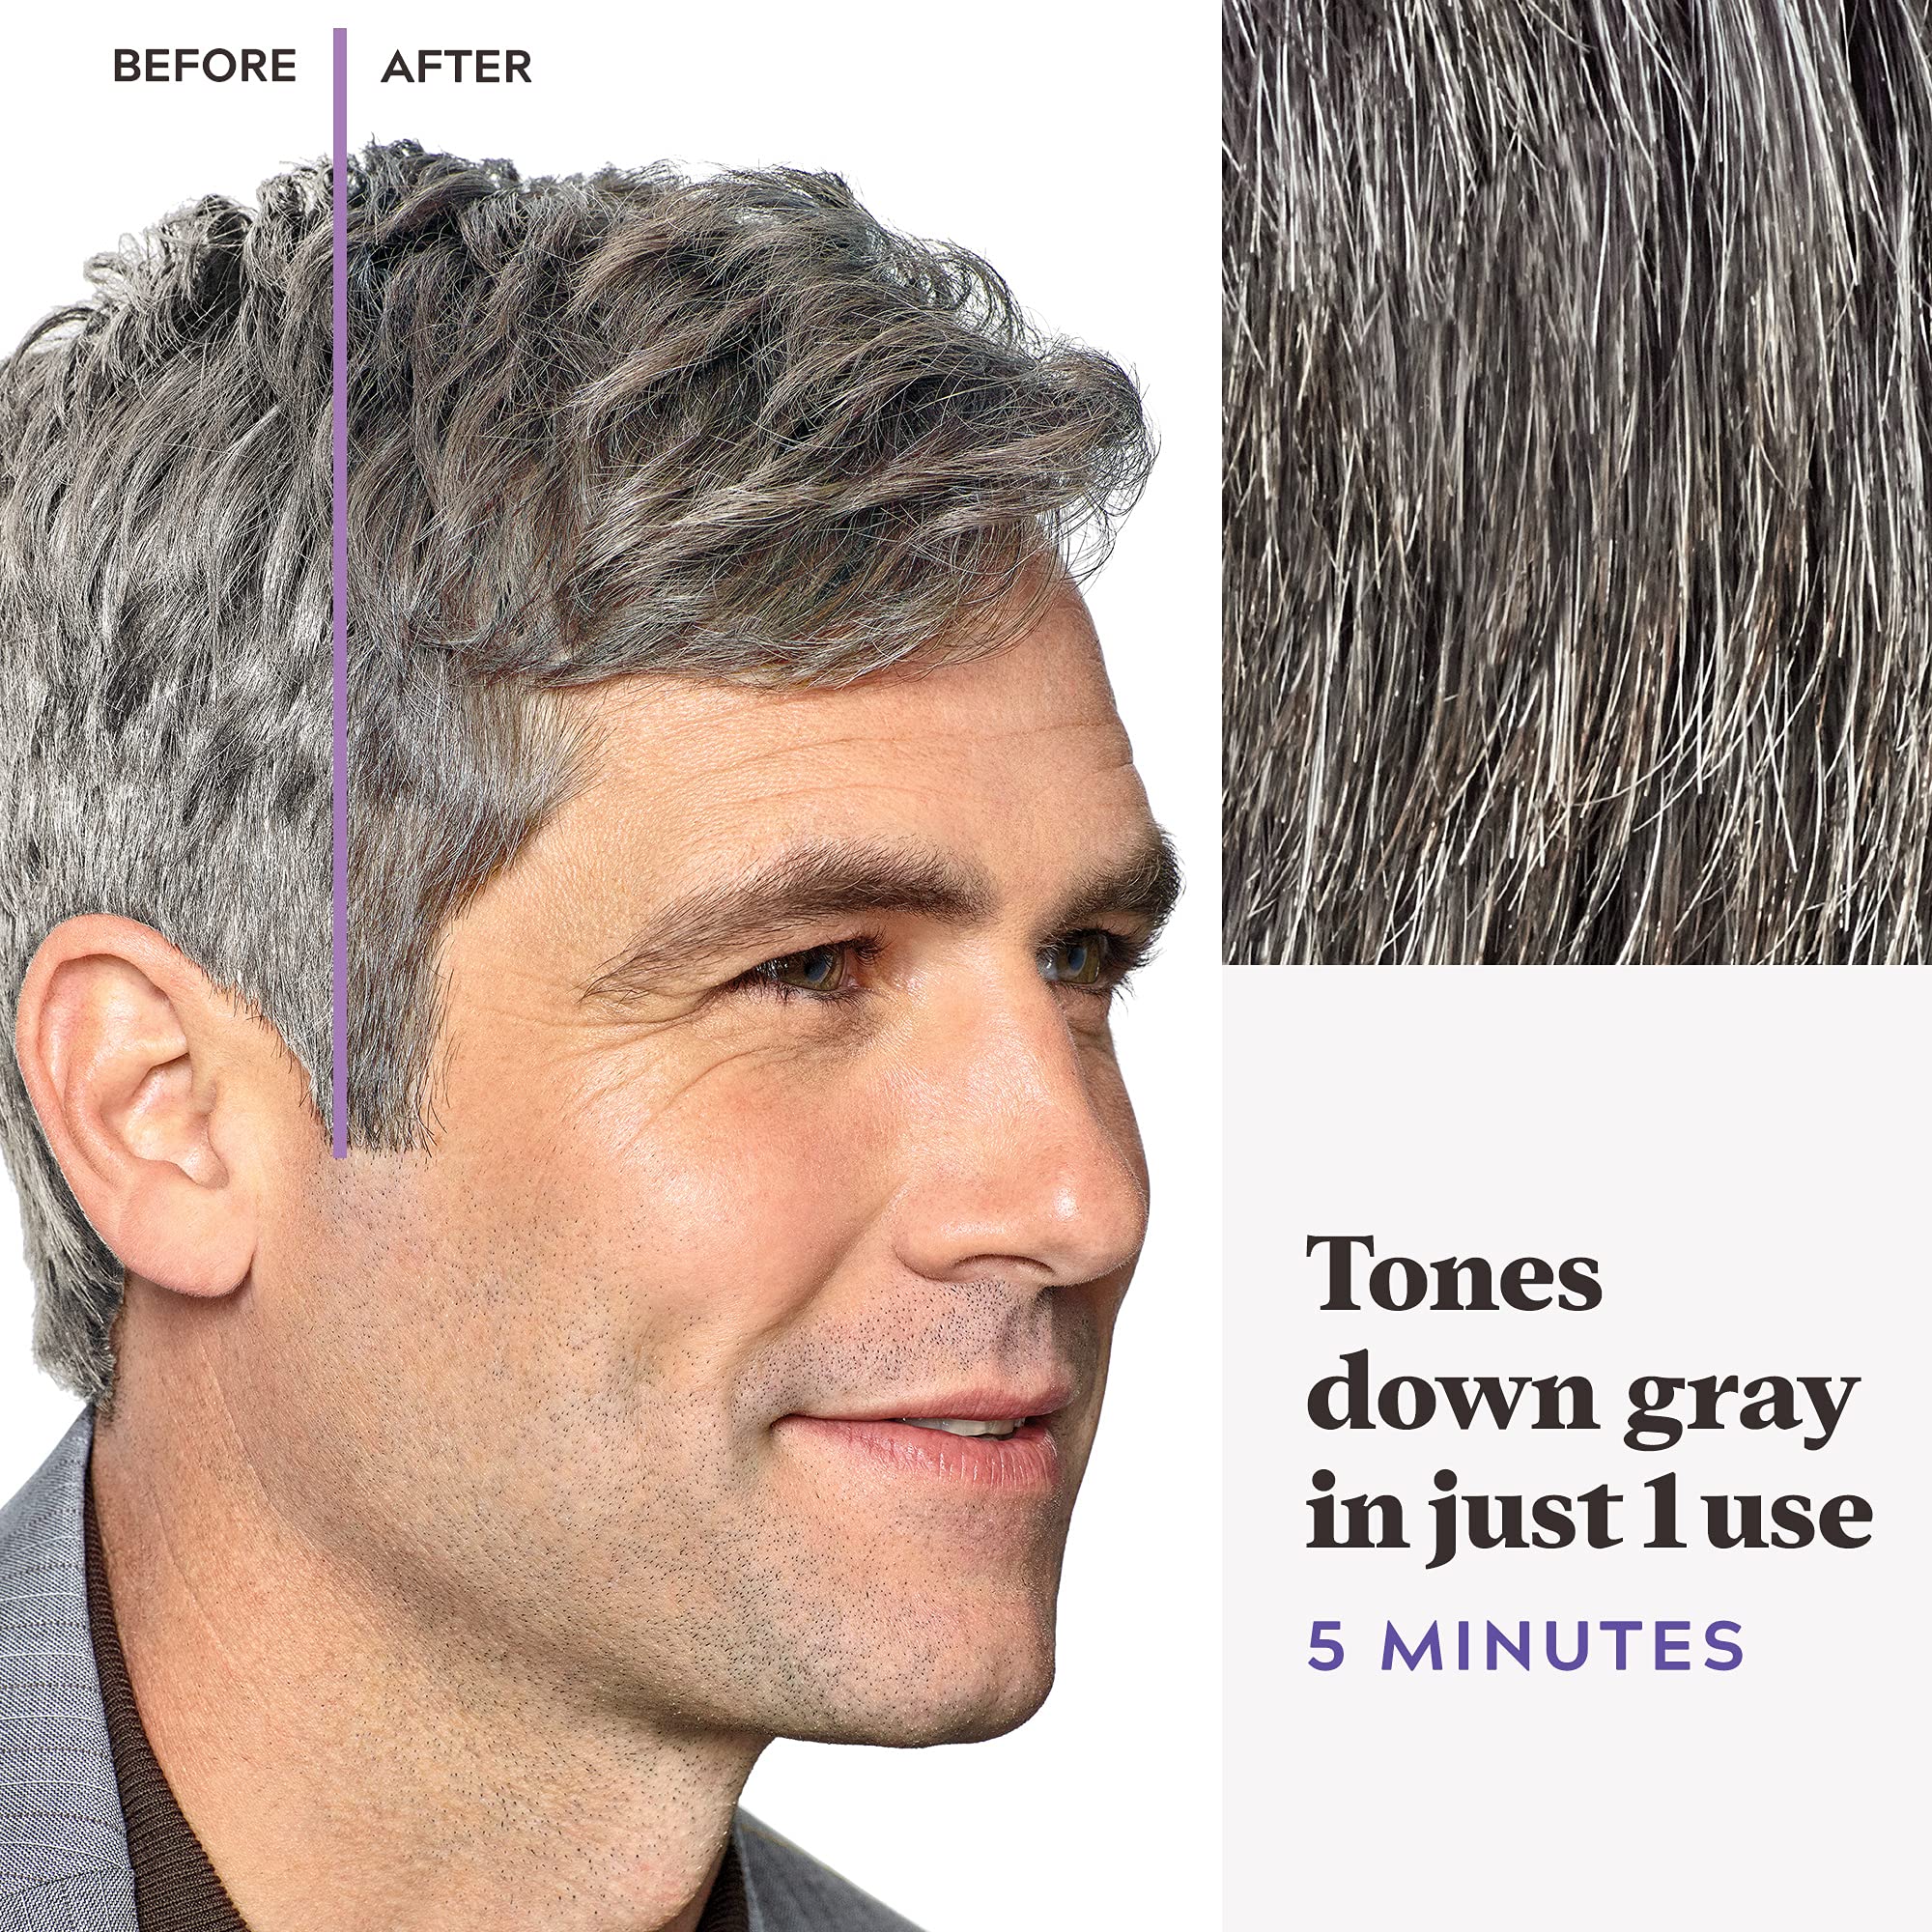 Just For Men Touch of Gray, Mens Hair Color Kit with Comb Applicator for Easy Application, Great for a Salt and Pepper Look - Medium Brown, T-35, Pack of 3